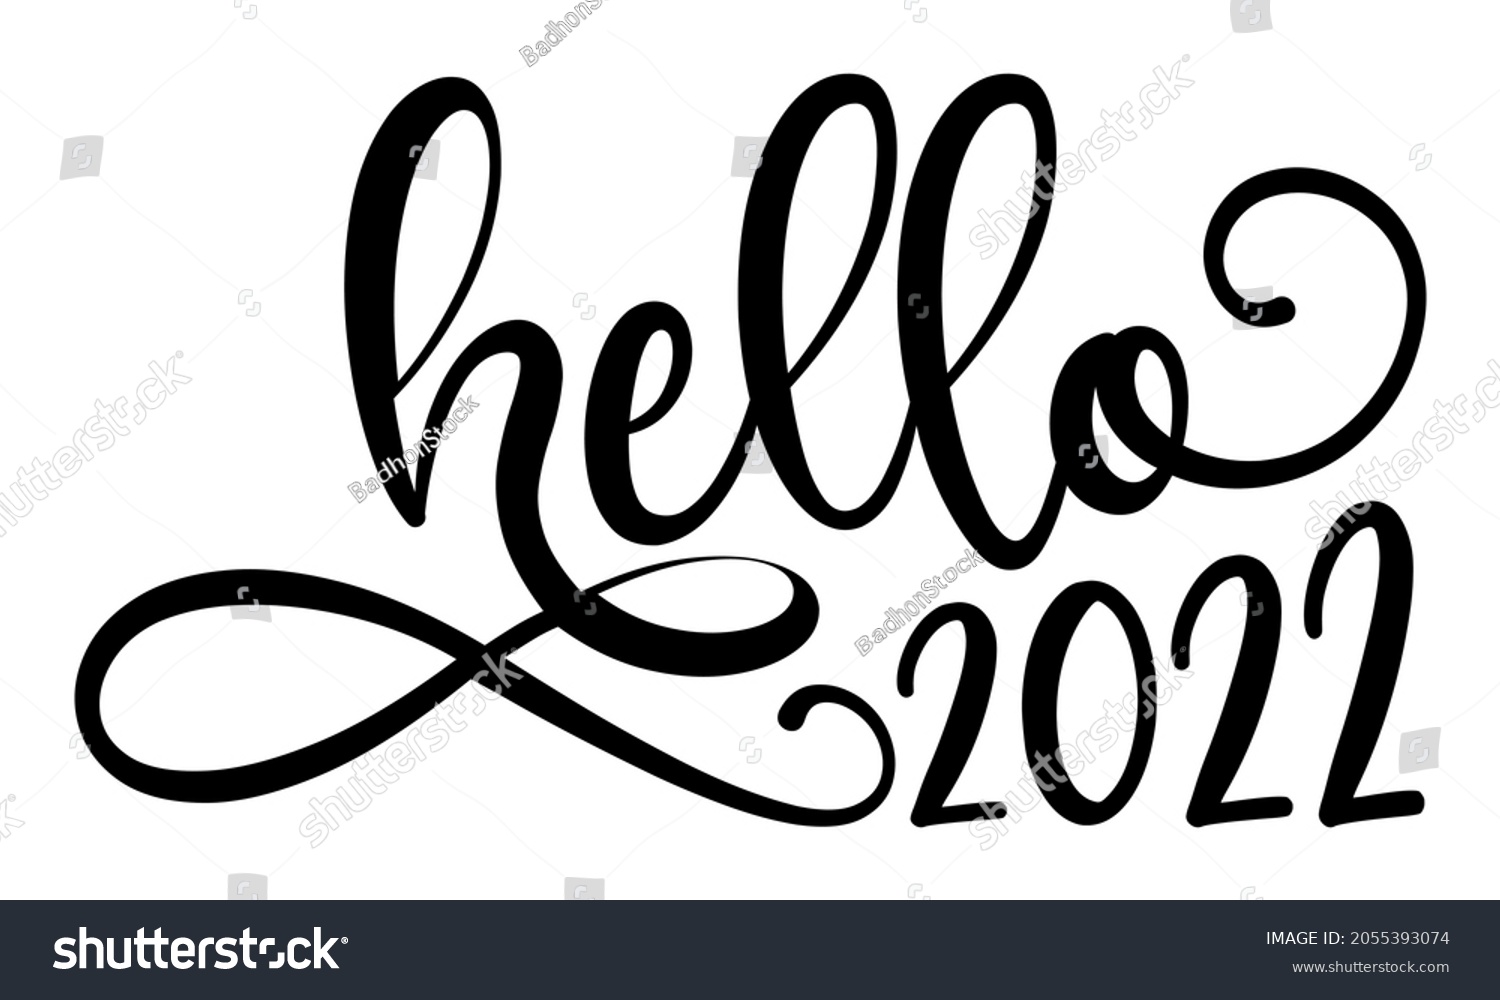 SVG of Hello 2022 SVG Design | Happy New Year SVG Cut File for Cutting svg